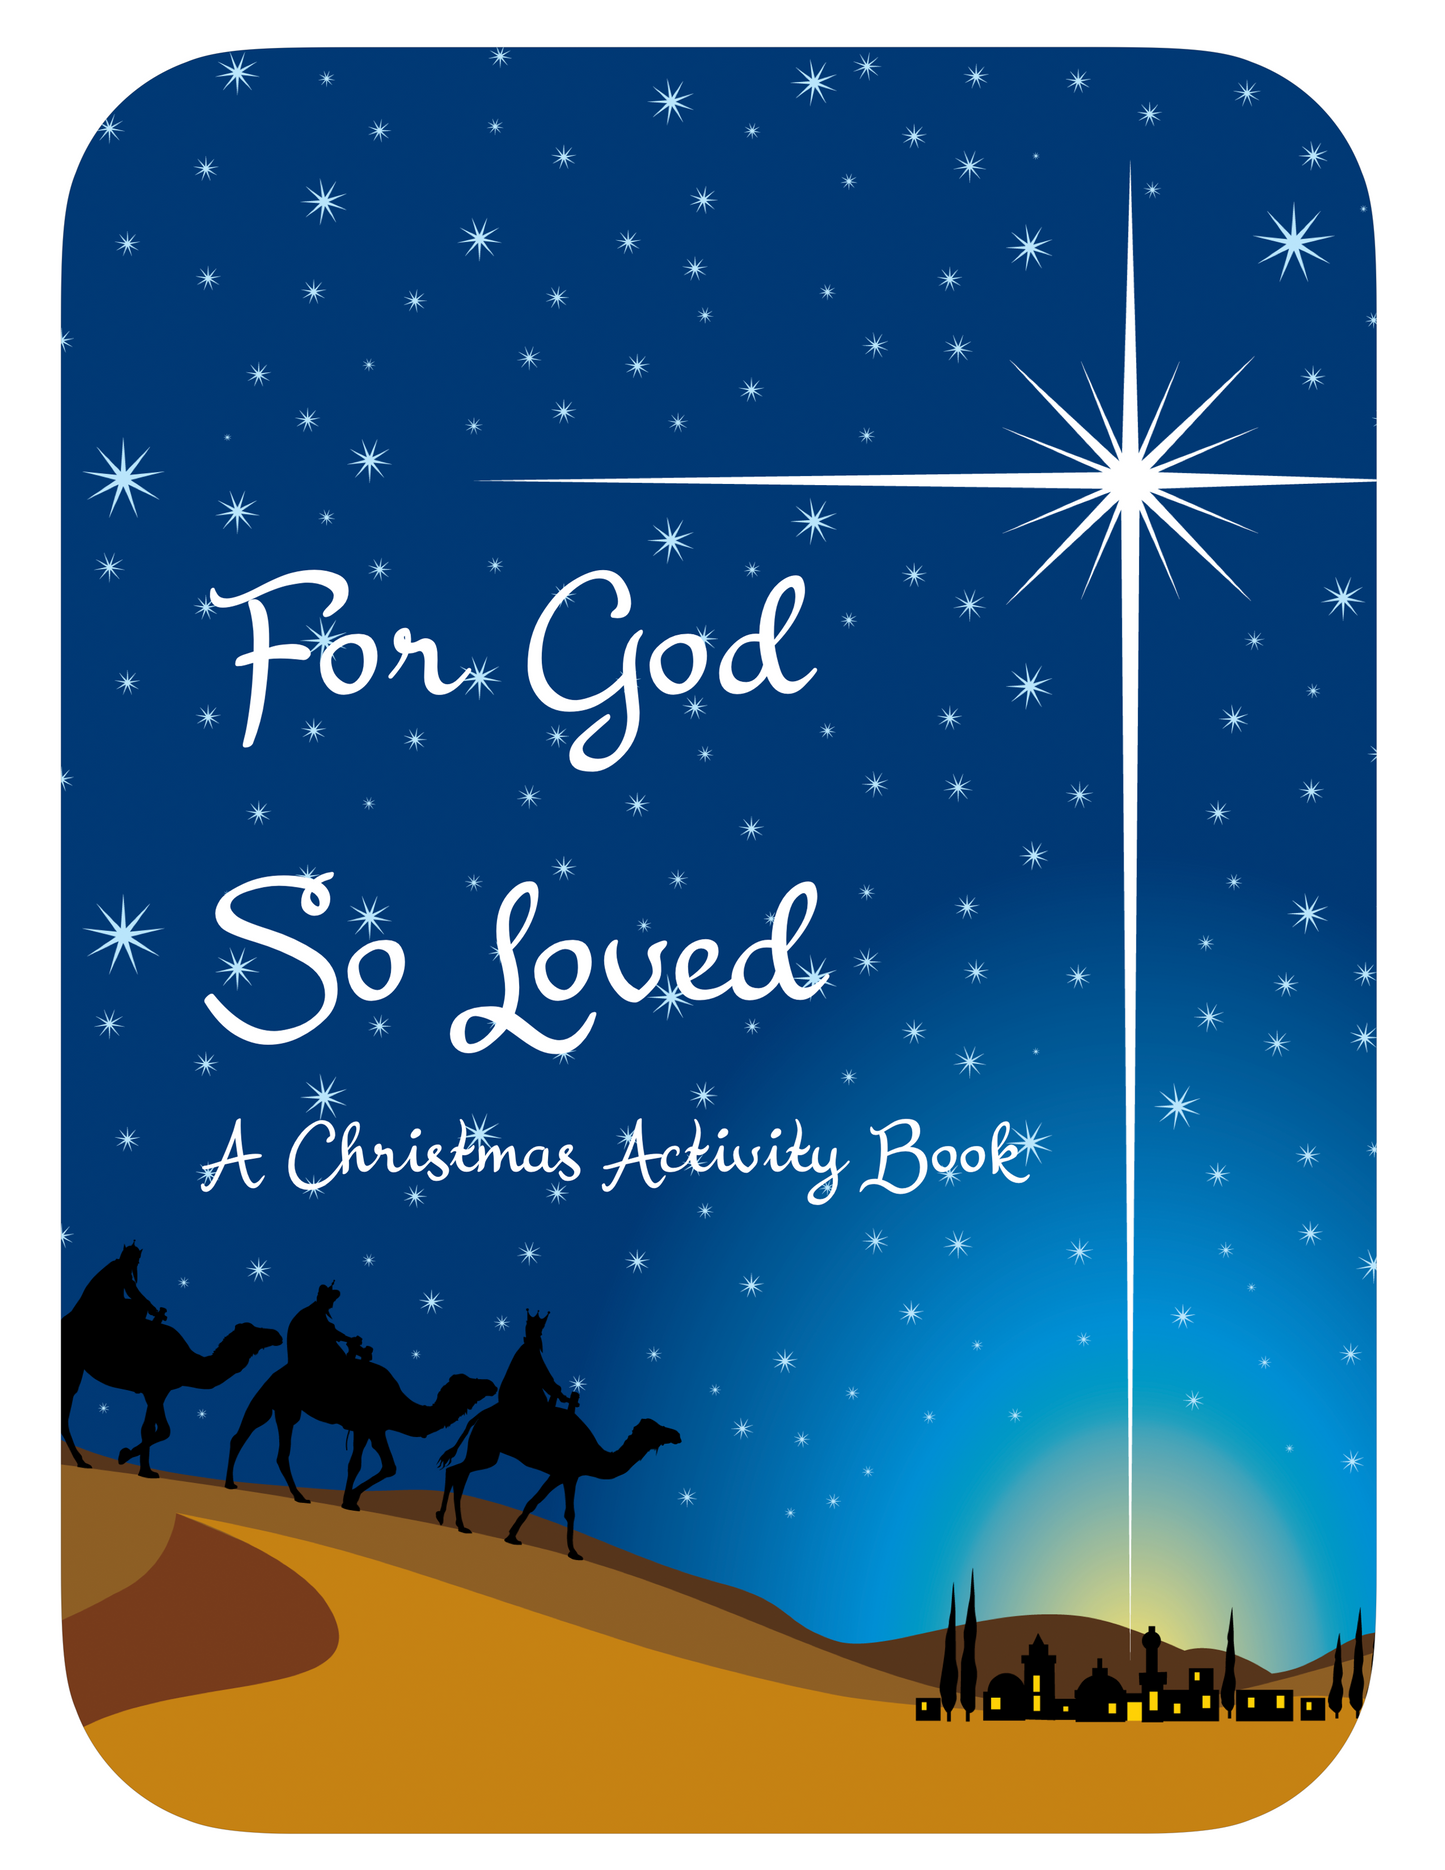 For God So Loved - A Christmas Activity Book (Digital Download)